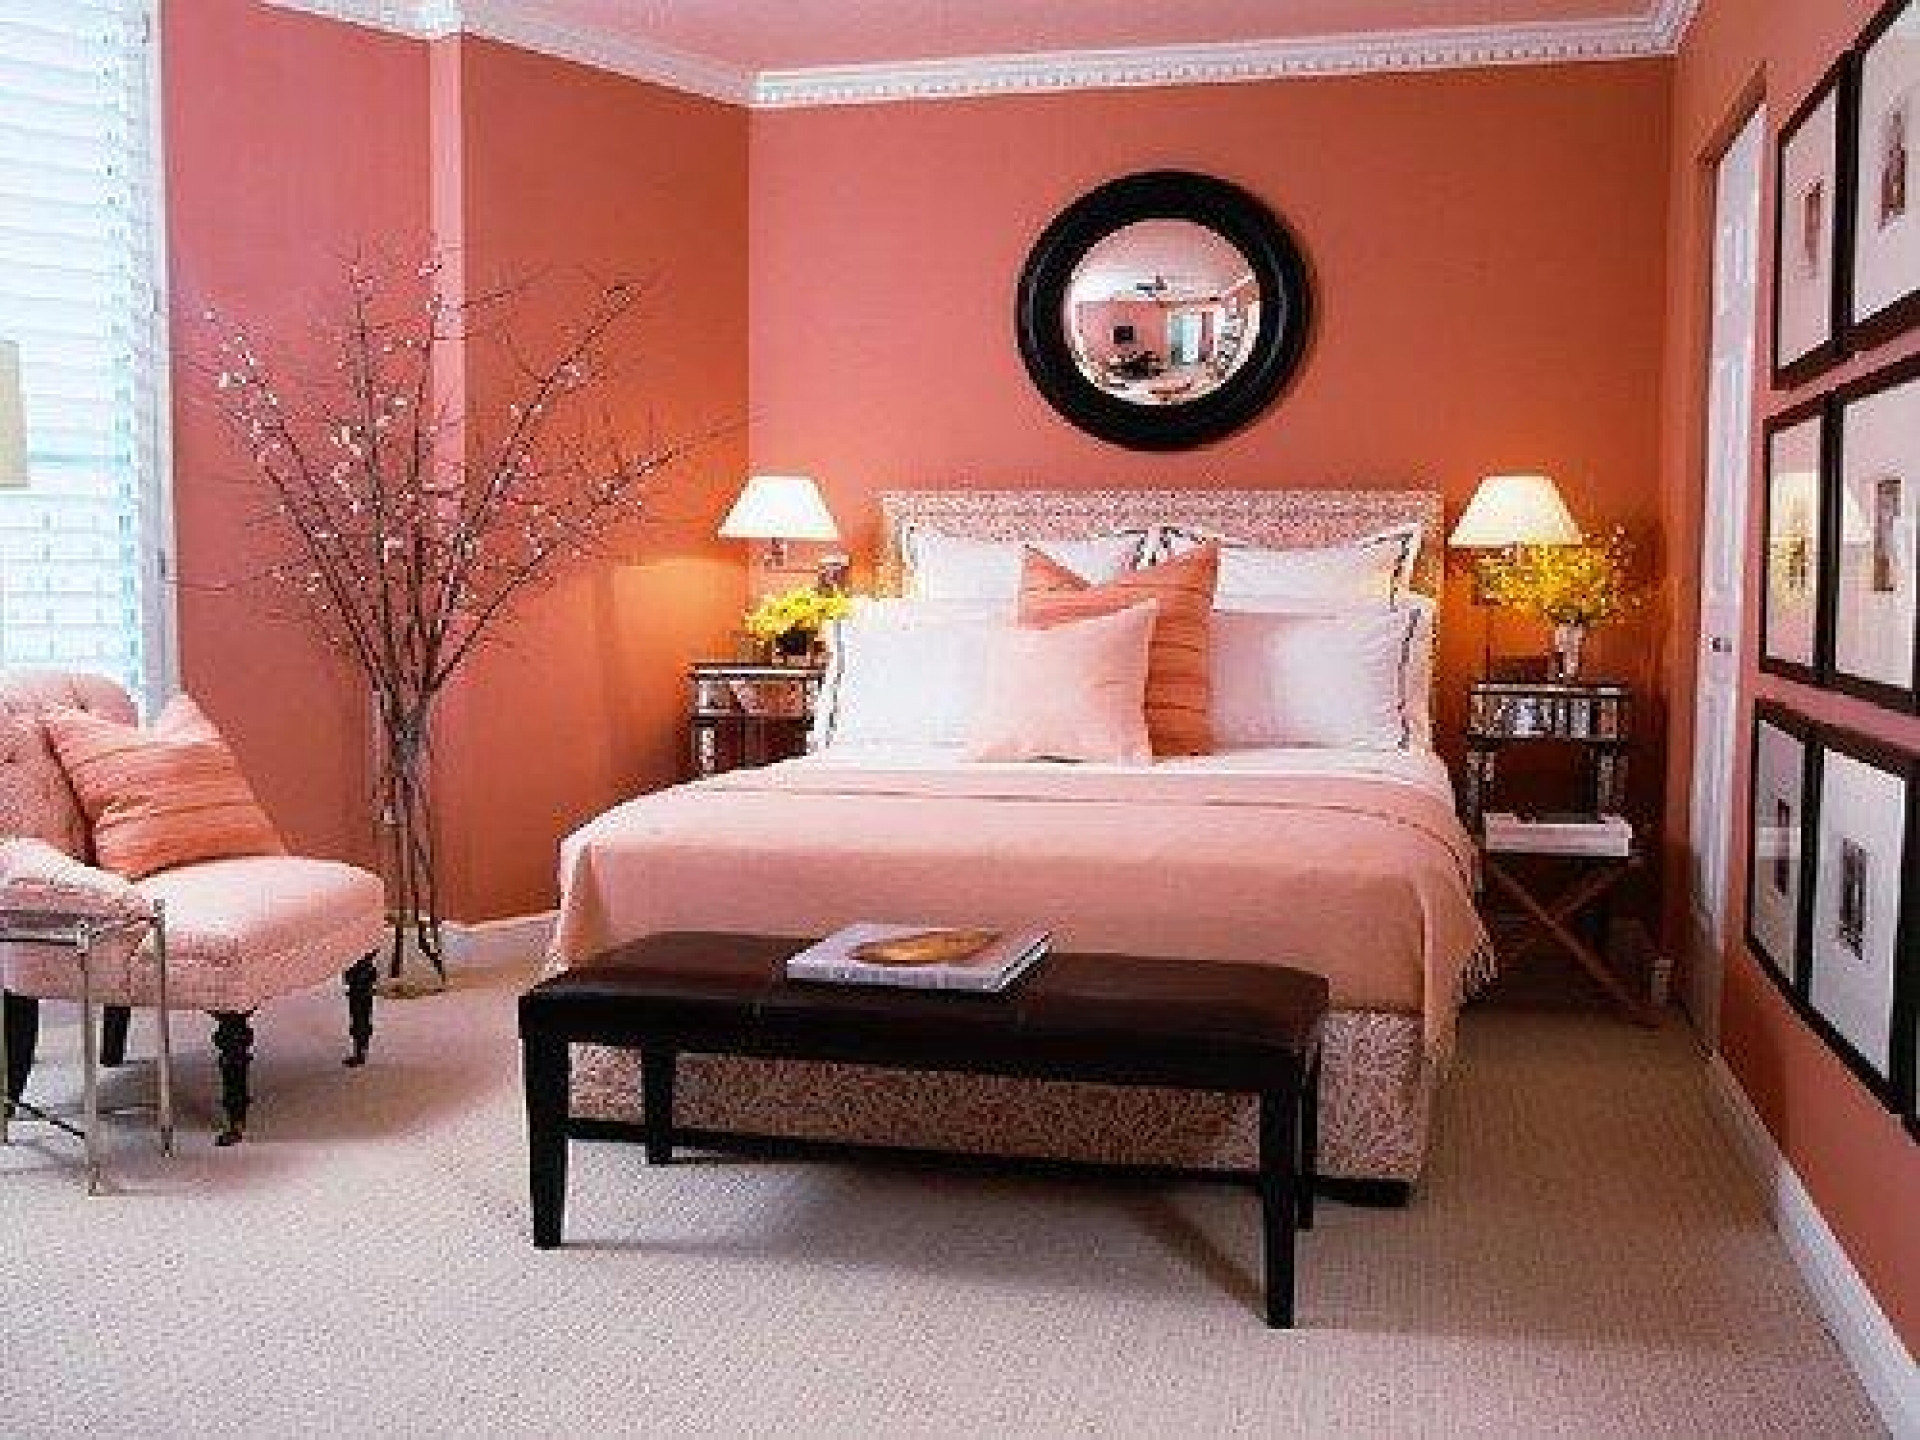 Bedroom Decoration Ideas
 25 Beautiful Bedroom Ideas For Your Home – The WoW Style